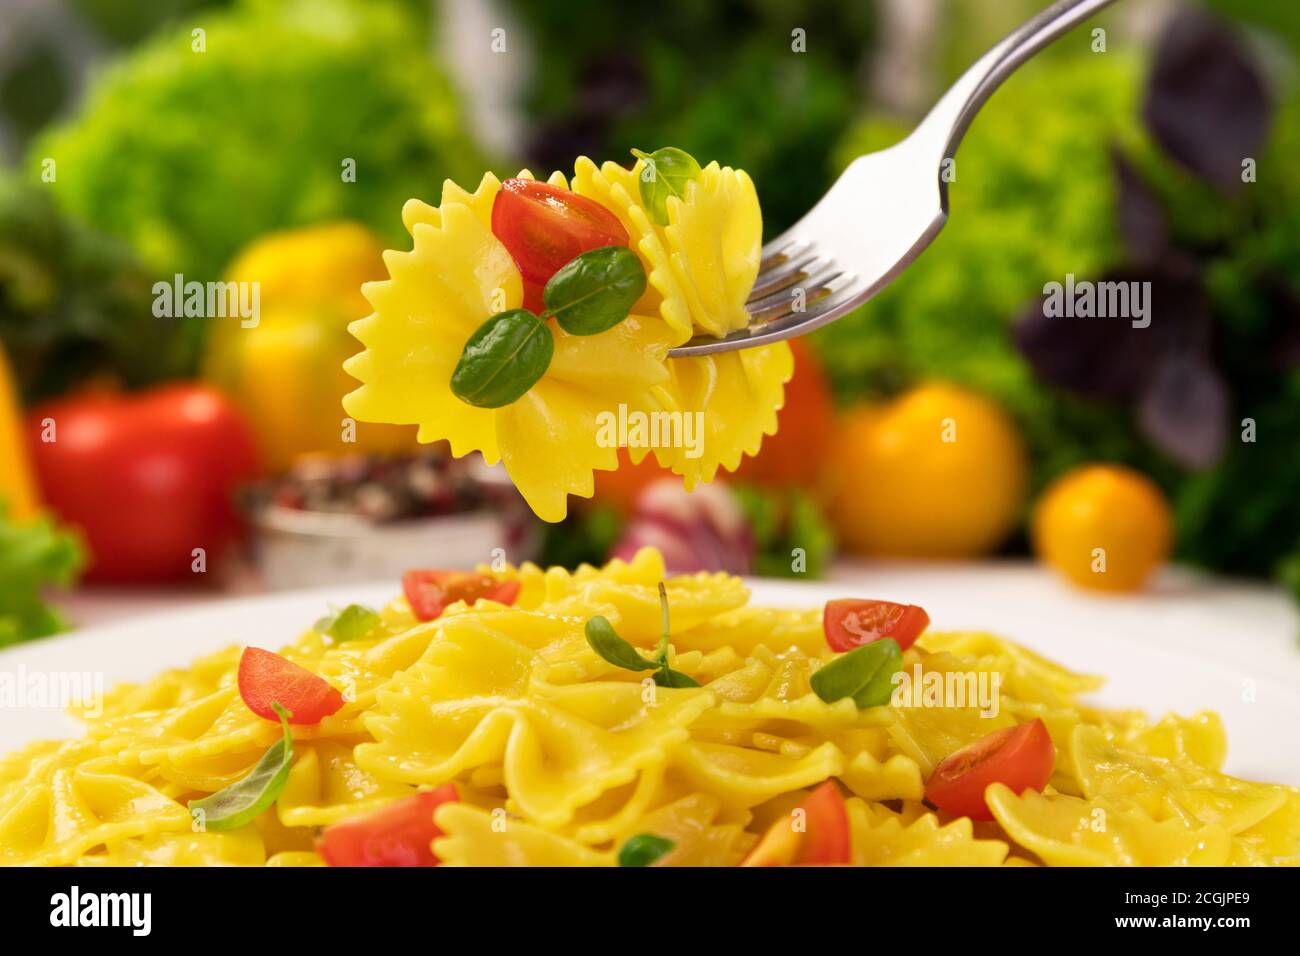 Plate of italian pasta, farfalle on fork with tomatoes and basil Stock Photo